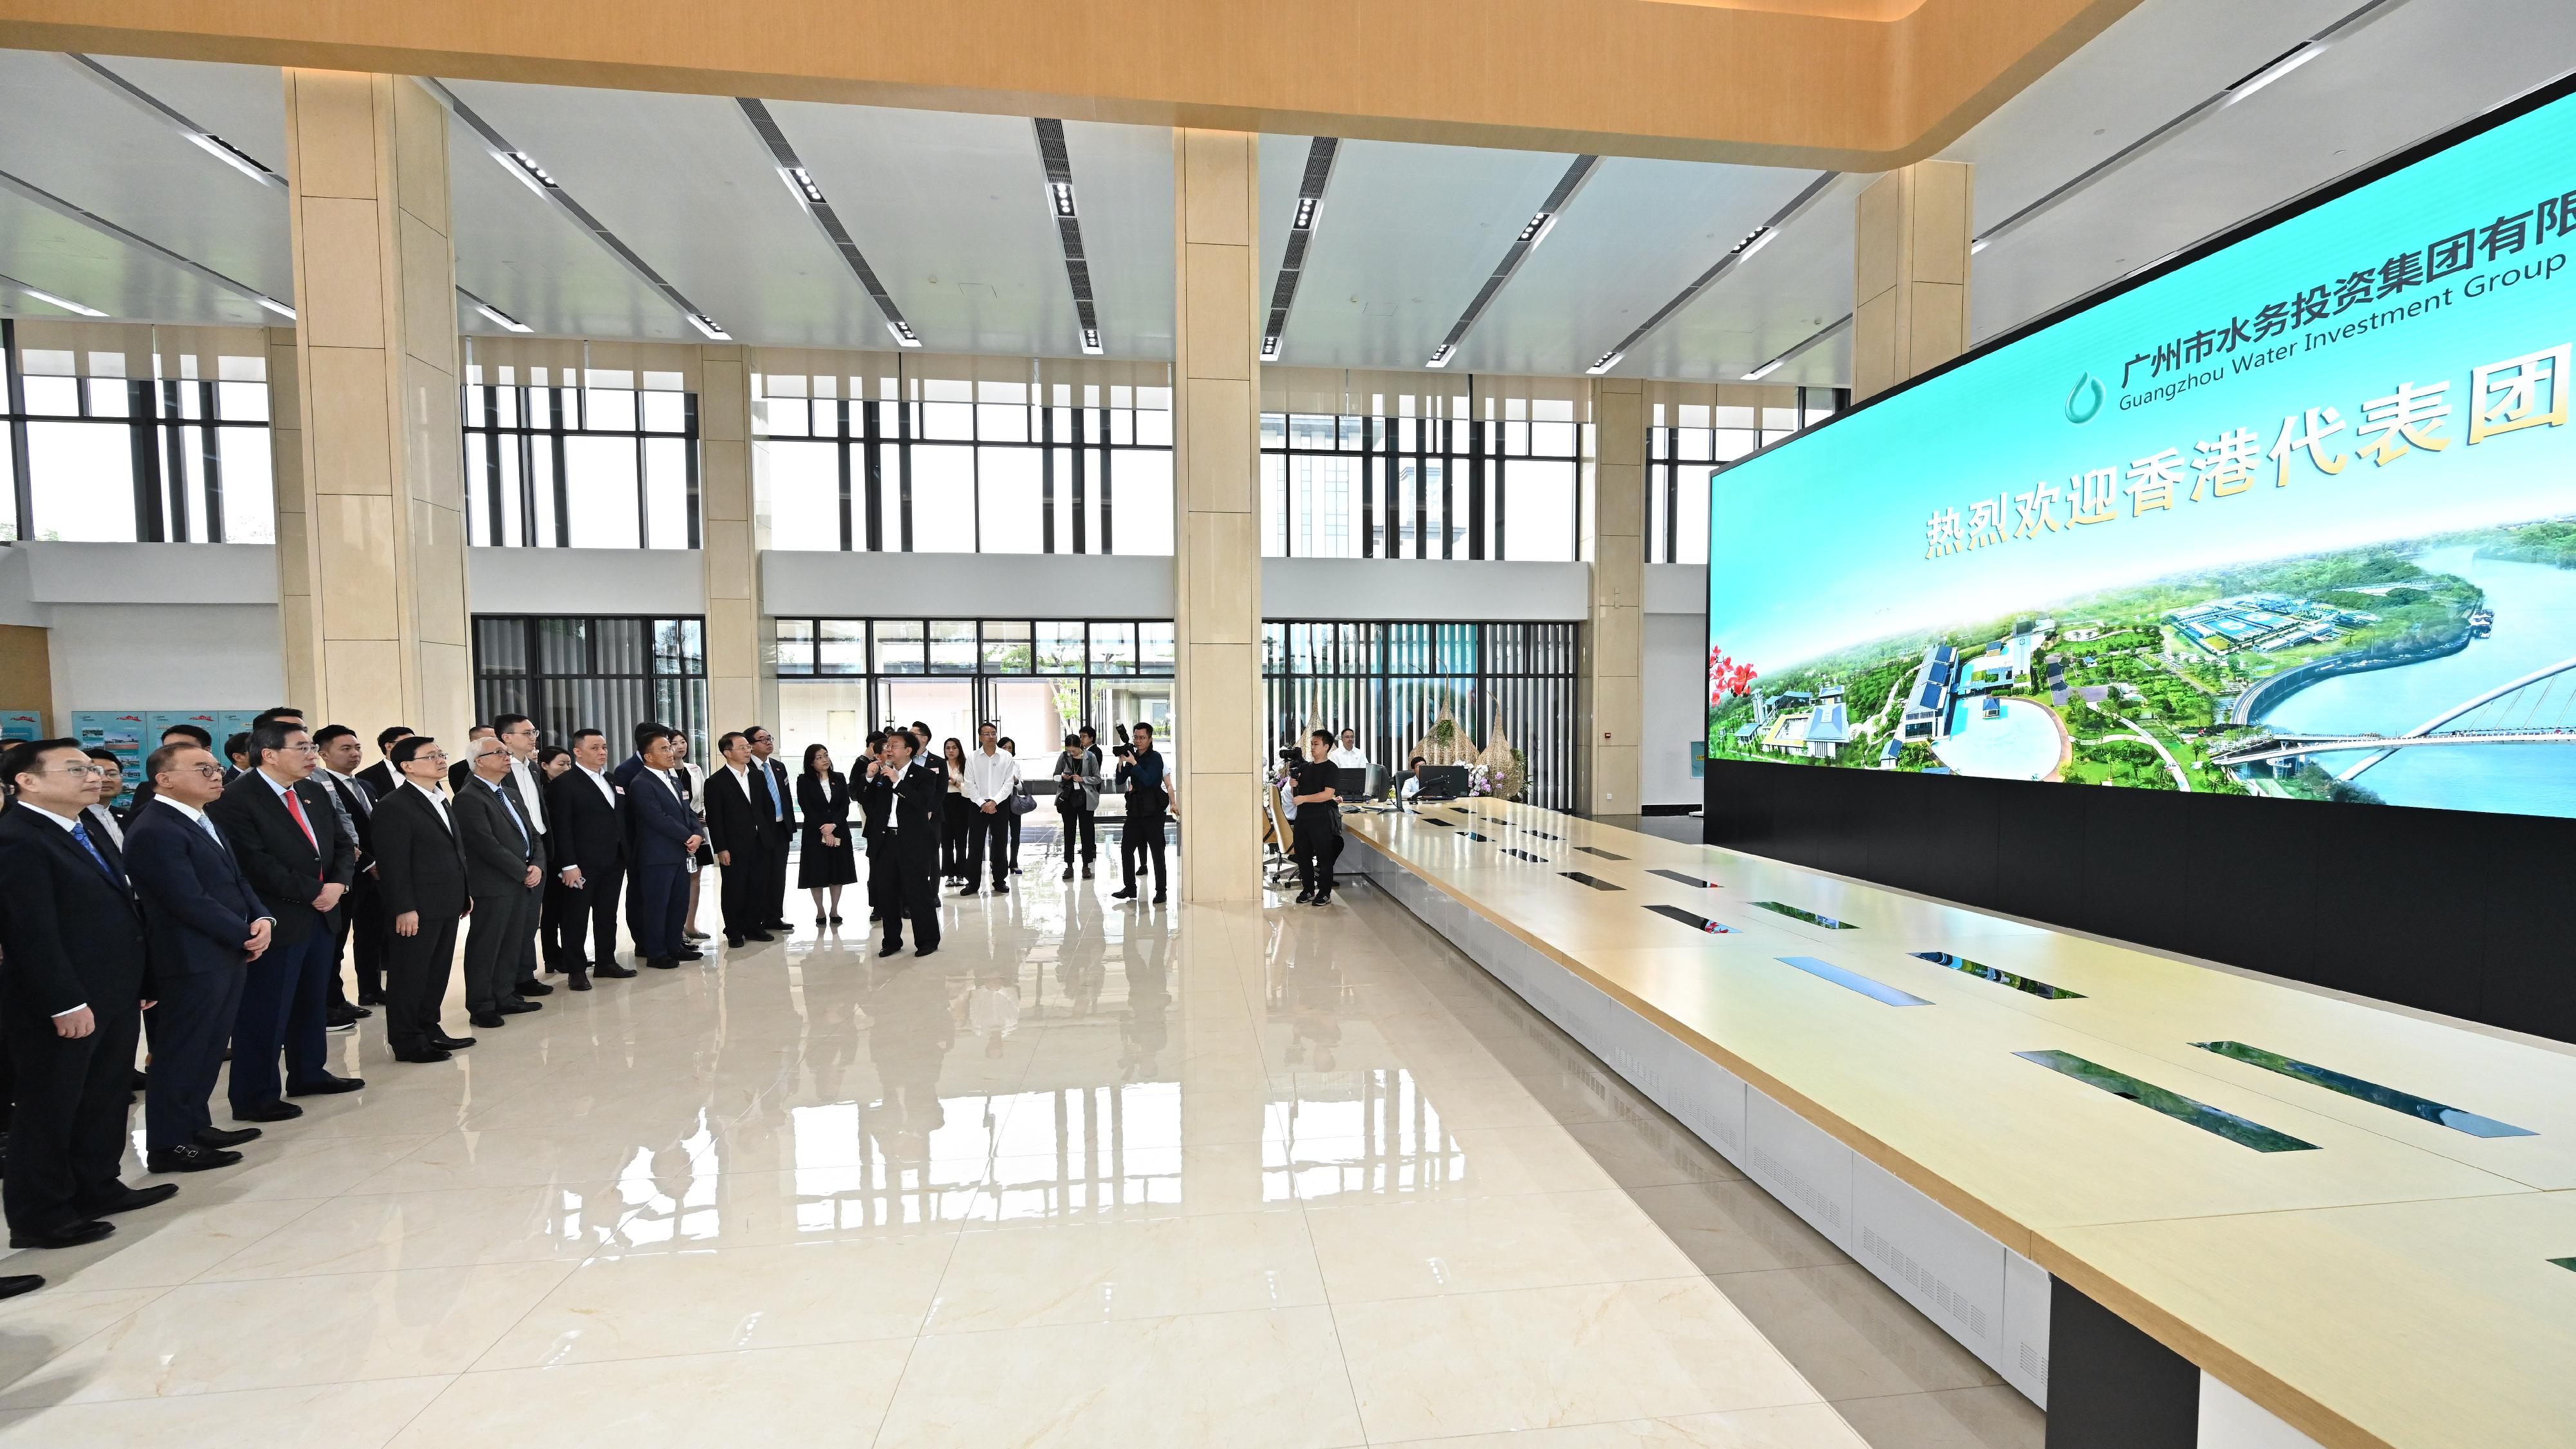 The Chief Executive, Mr John Lee, led a delegation of the Hong Kong Special Administrative Region Government and the Legislative Council to visit Guangdong-Hong Kong-Macao Greater Bay Area in Guangzhou today (April 24). Photo shows Mr Lee (fourth left) and members of the delegation visiting the Lijiao sewage treatment plant  and watching an introduction video.